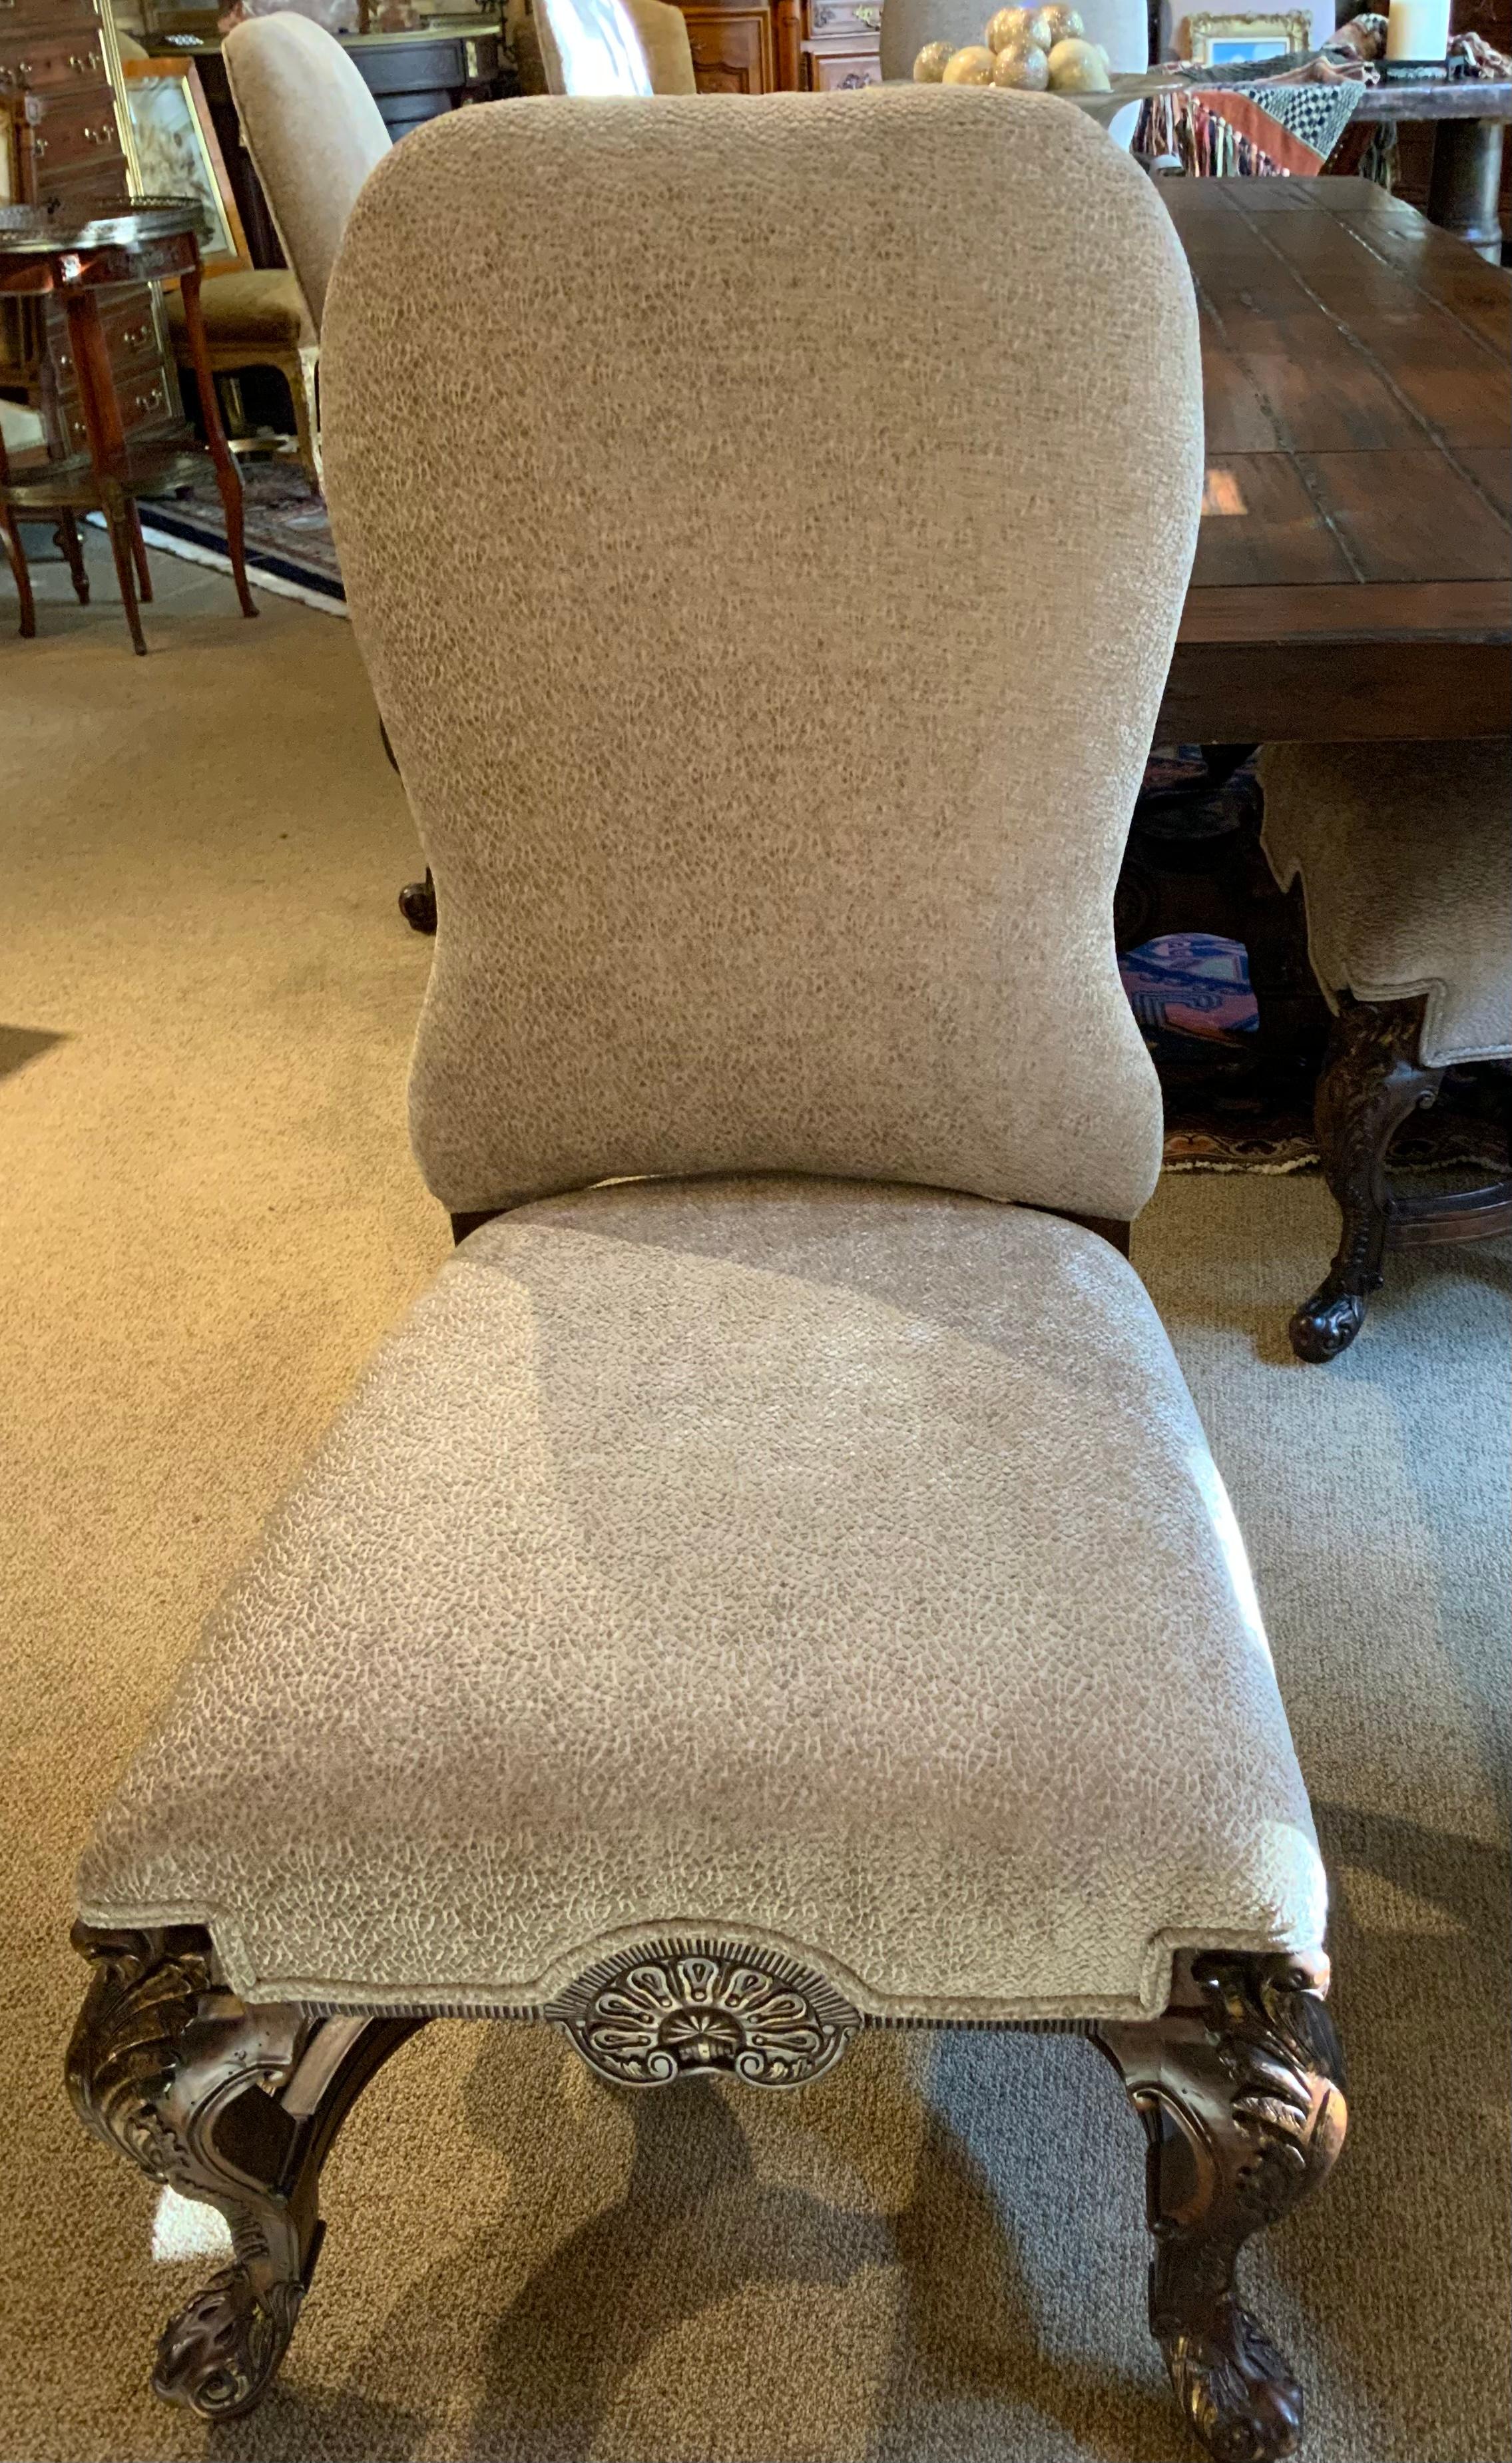 These chairs are comfortable with new upholstery and have padding 
That is well cushioned and yet firm enough for the best support to
Both the seat and back. The fabric is in a cream/gray hue which is a
Neutral that blends with many interior